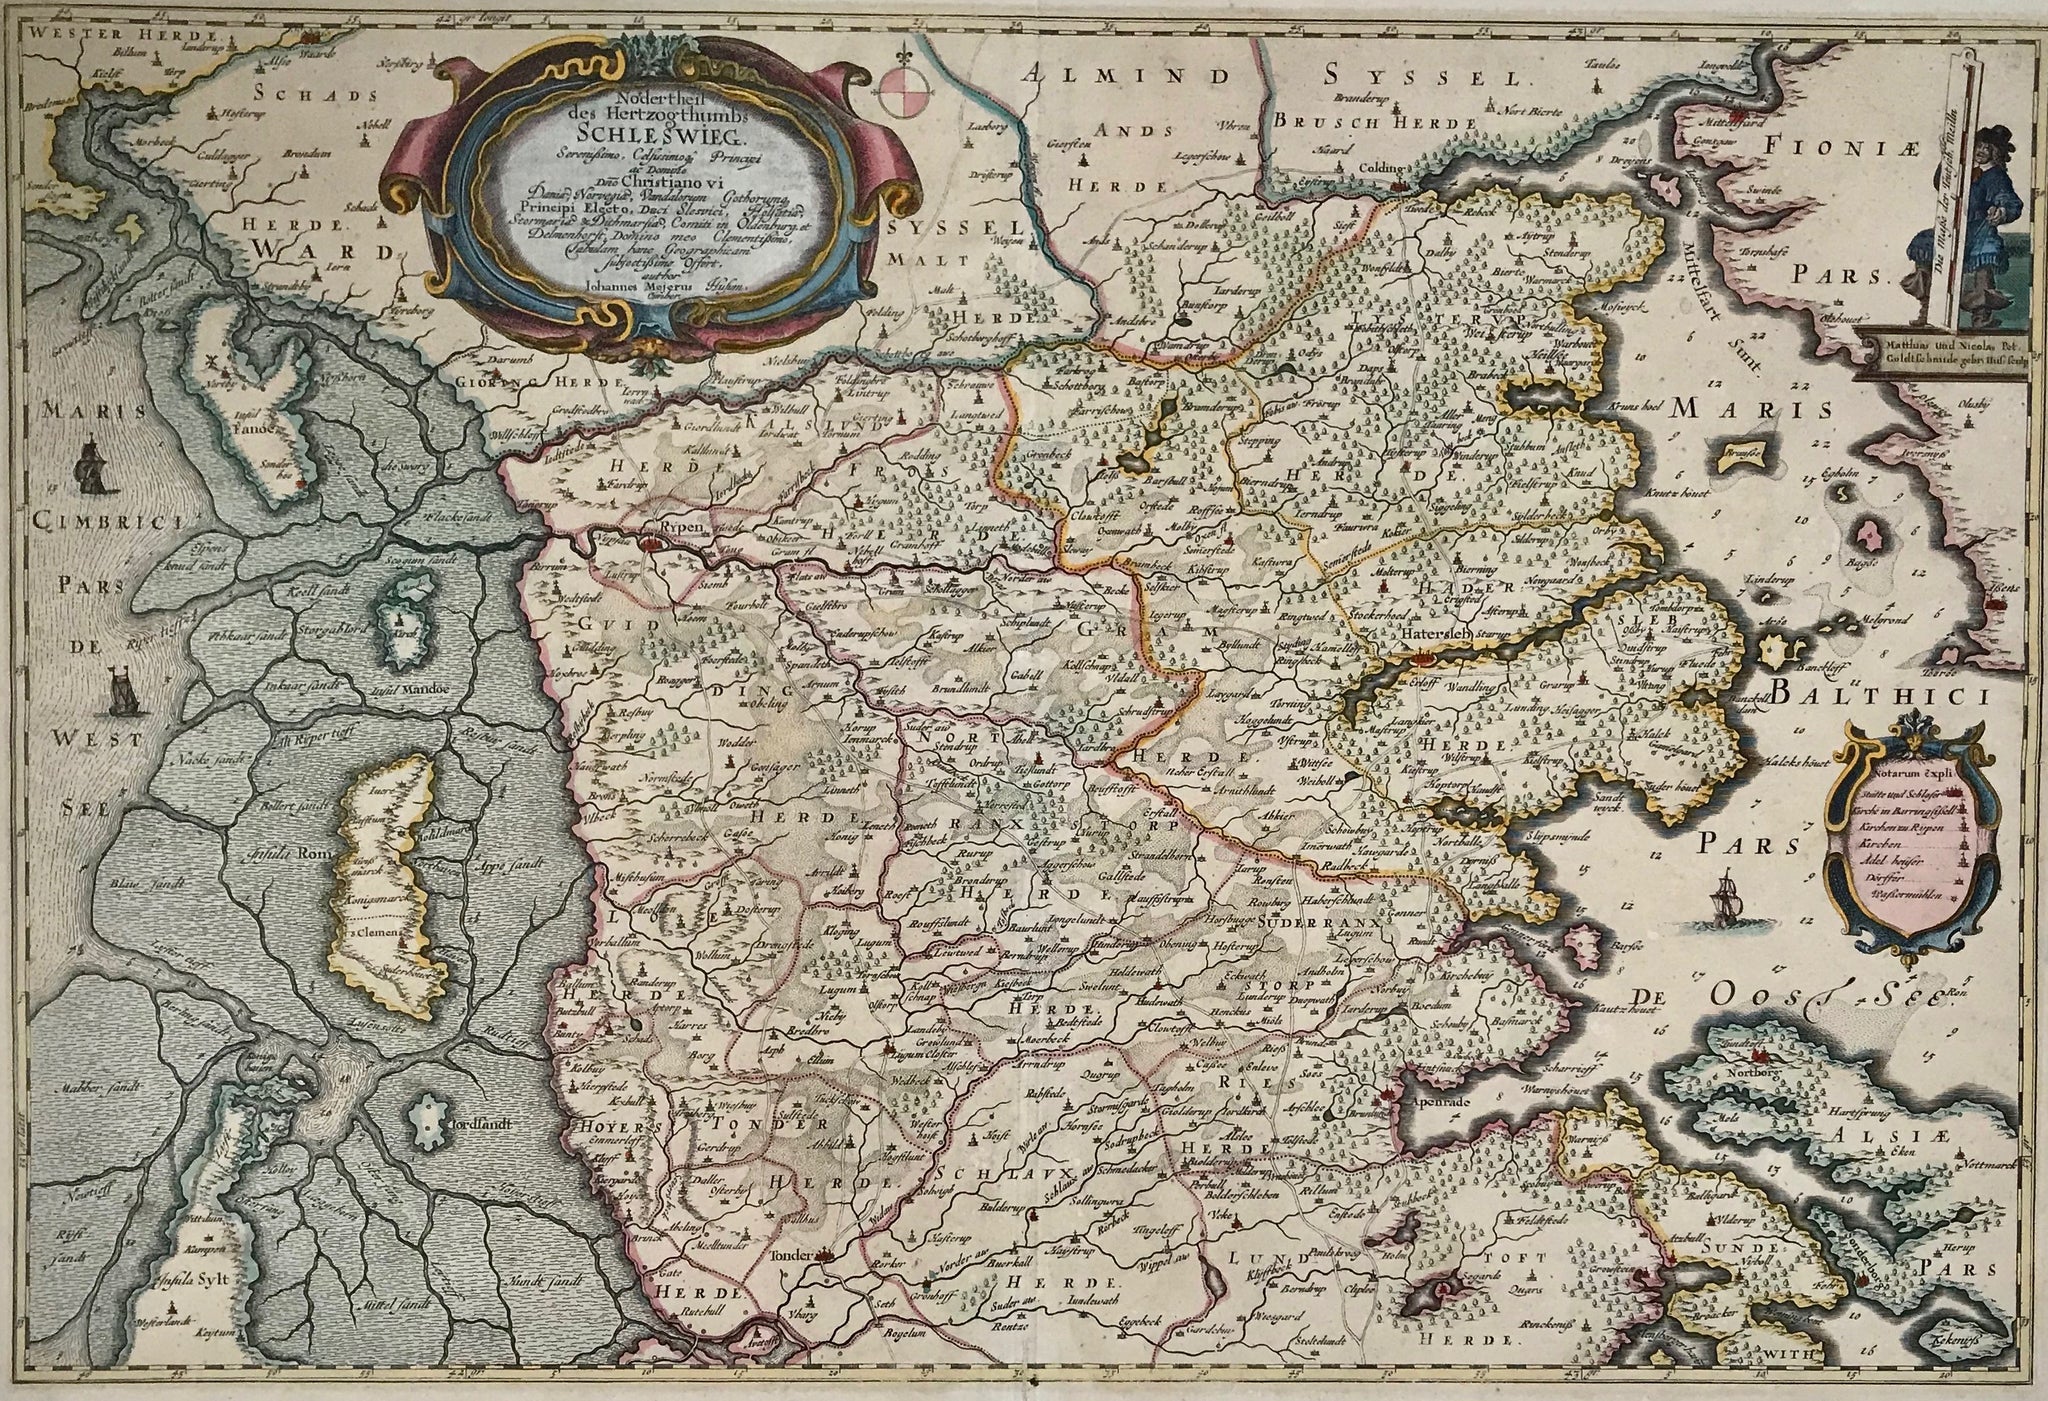 "Nordertheil des Herzogthumbs Schleswig". Copper etching Johannes Mejerus (1606-1674). Published ca 1650. Later hand coloring.  This map shows the northern region of SchleswigIn the lower right is Als and in the lower left is Sylt. In the upper right is Middlefart. In the upper left is Vaarde.